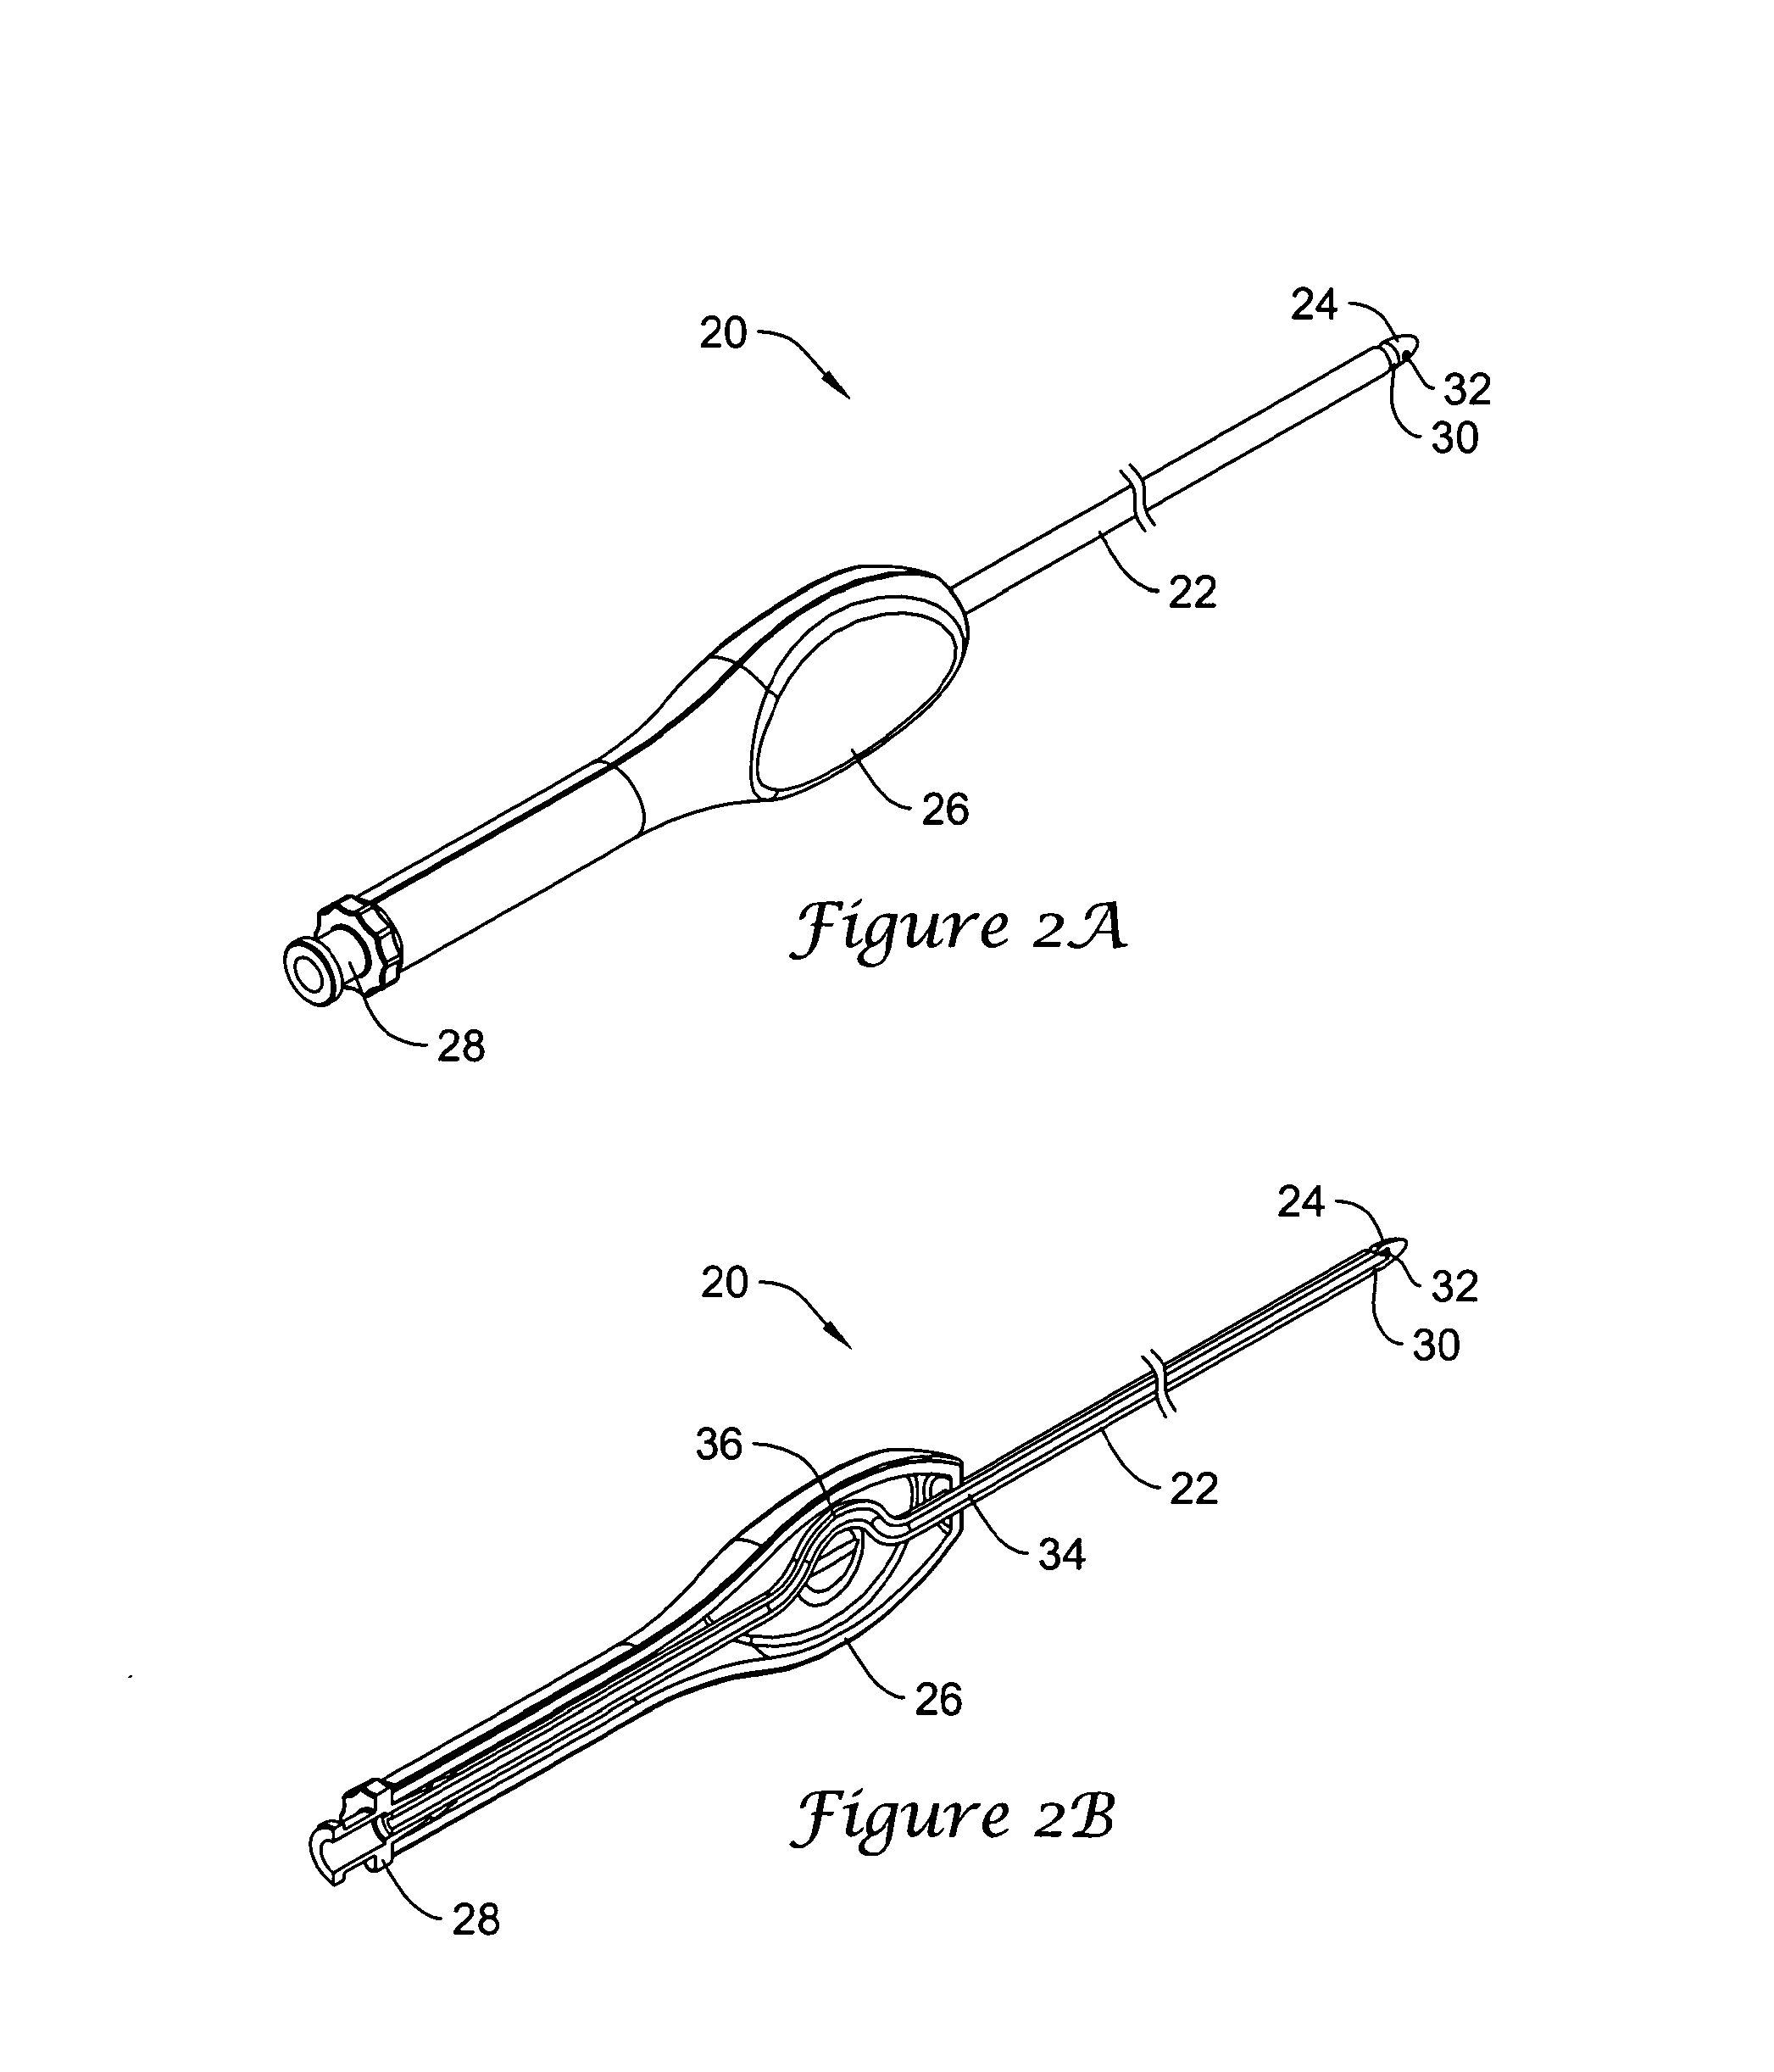 Apparatus for subcutaneous electrode insertion